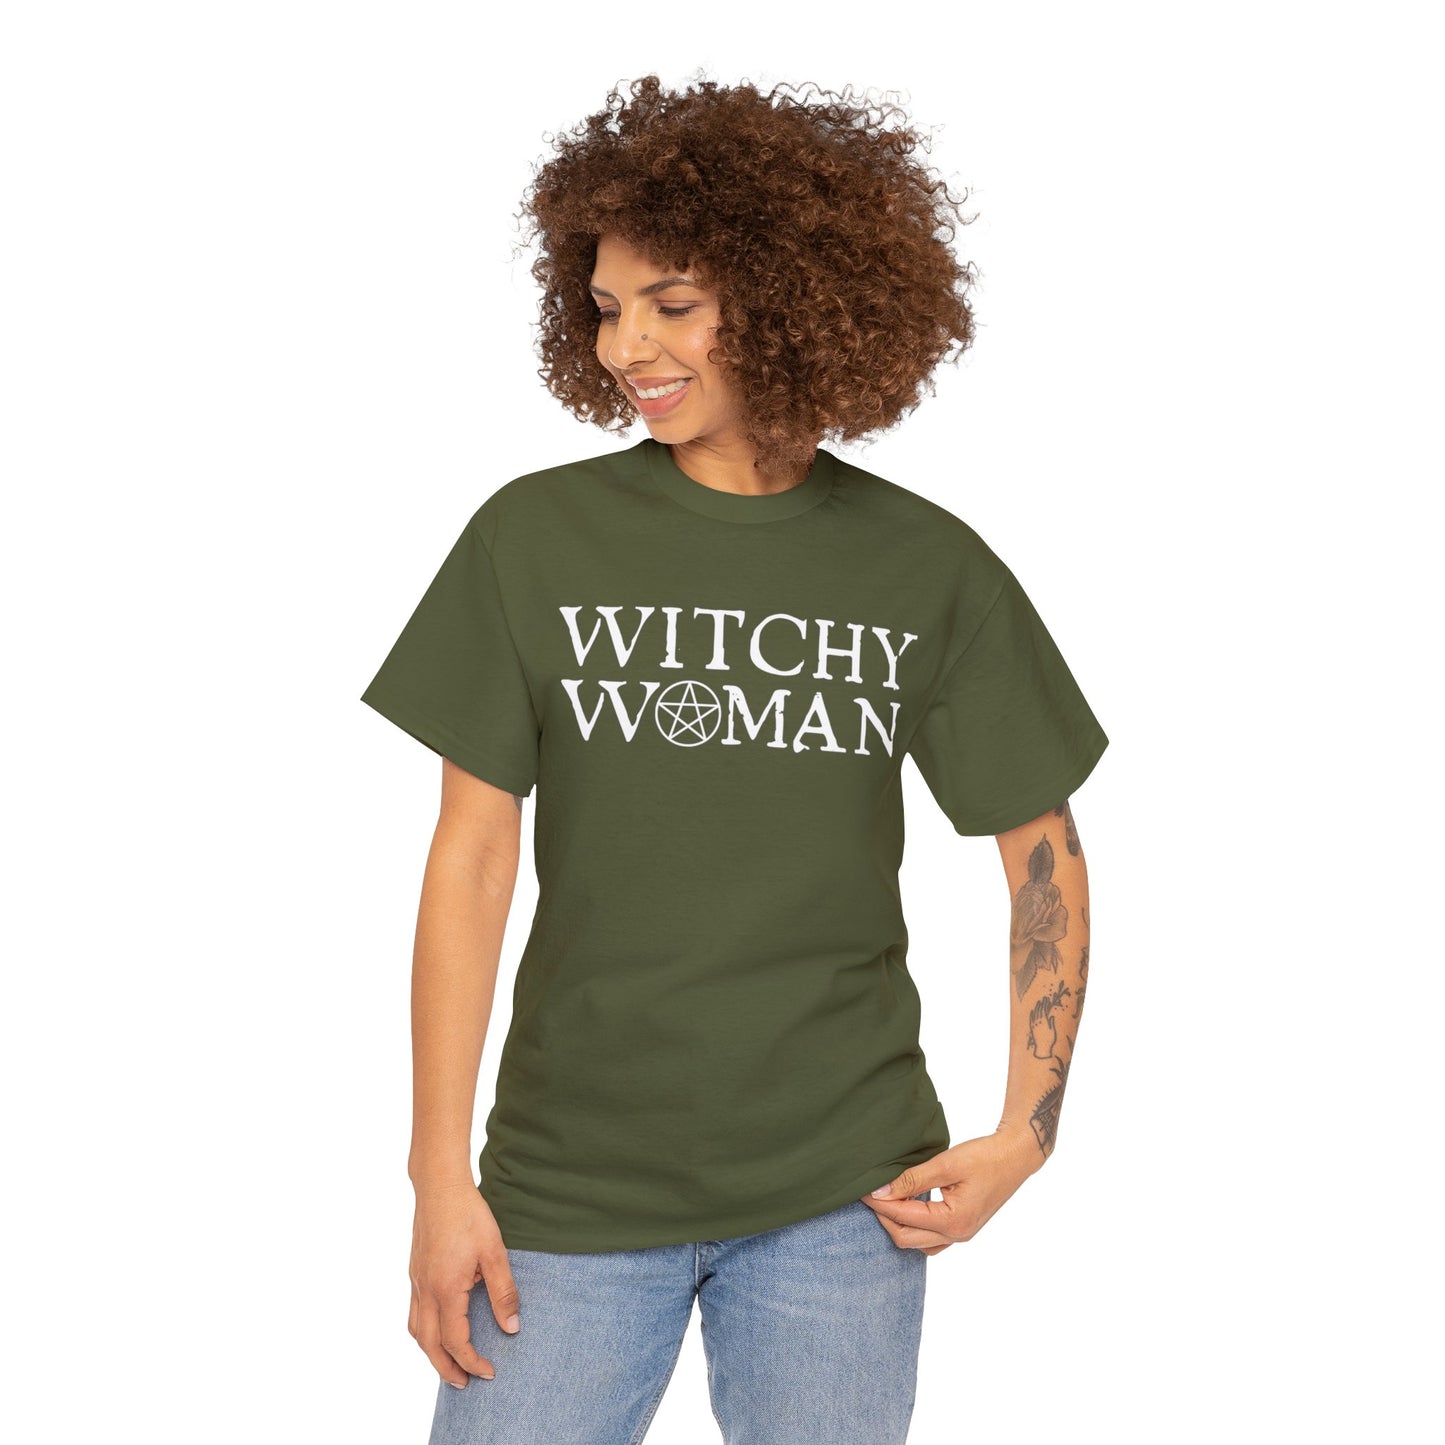 Witchy Woman Unisex Cotton Tee